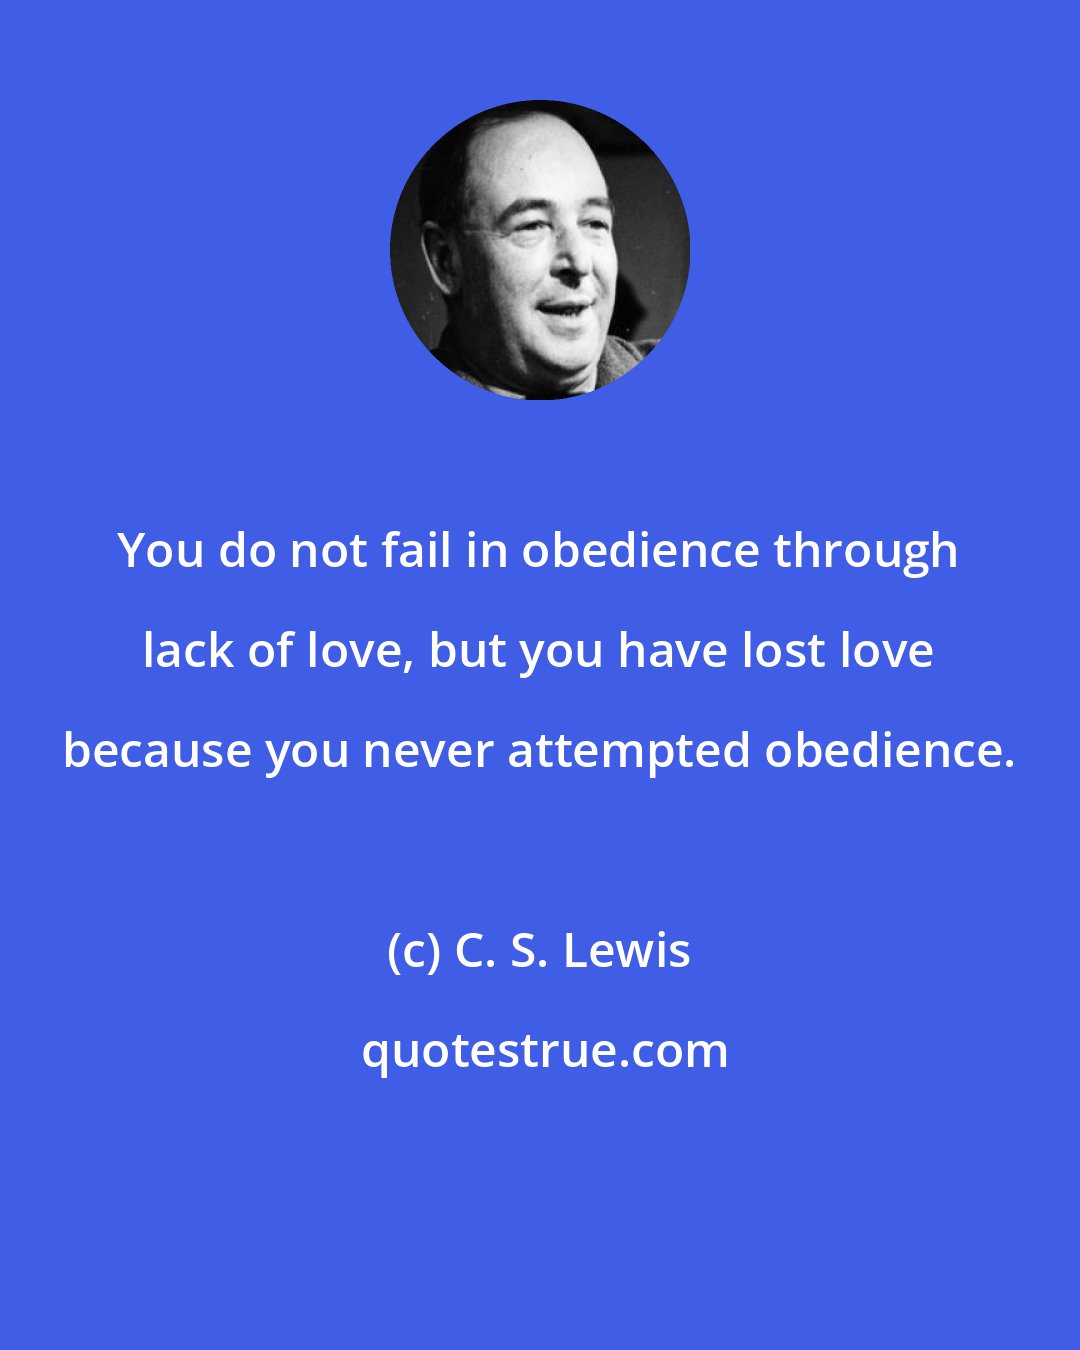 C. S. Lewis: You do not fail in obedience through lack of love, but you have lost love because you never attempted obedience.